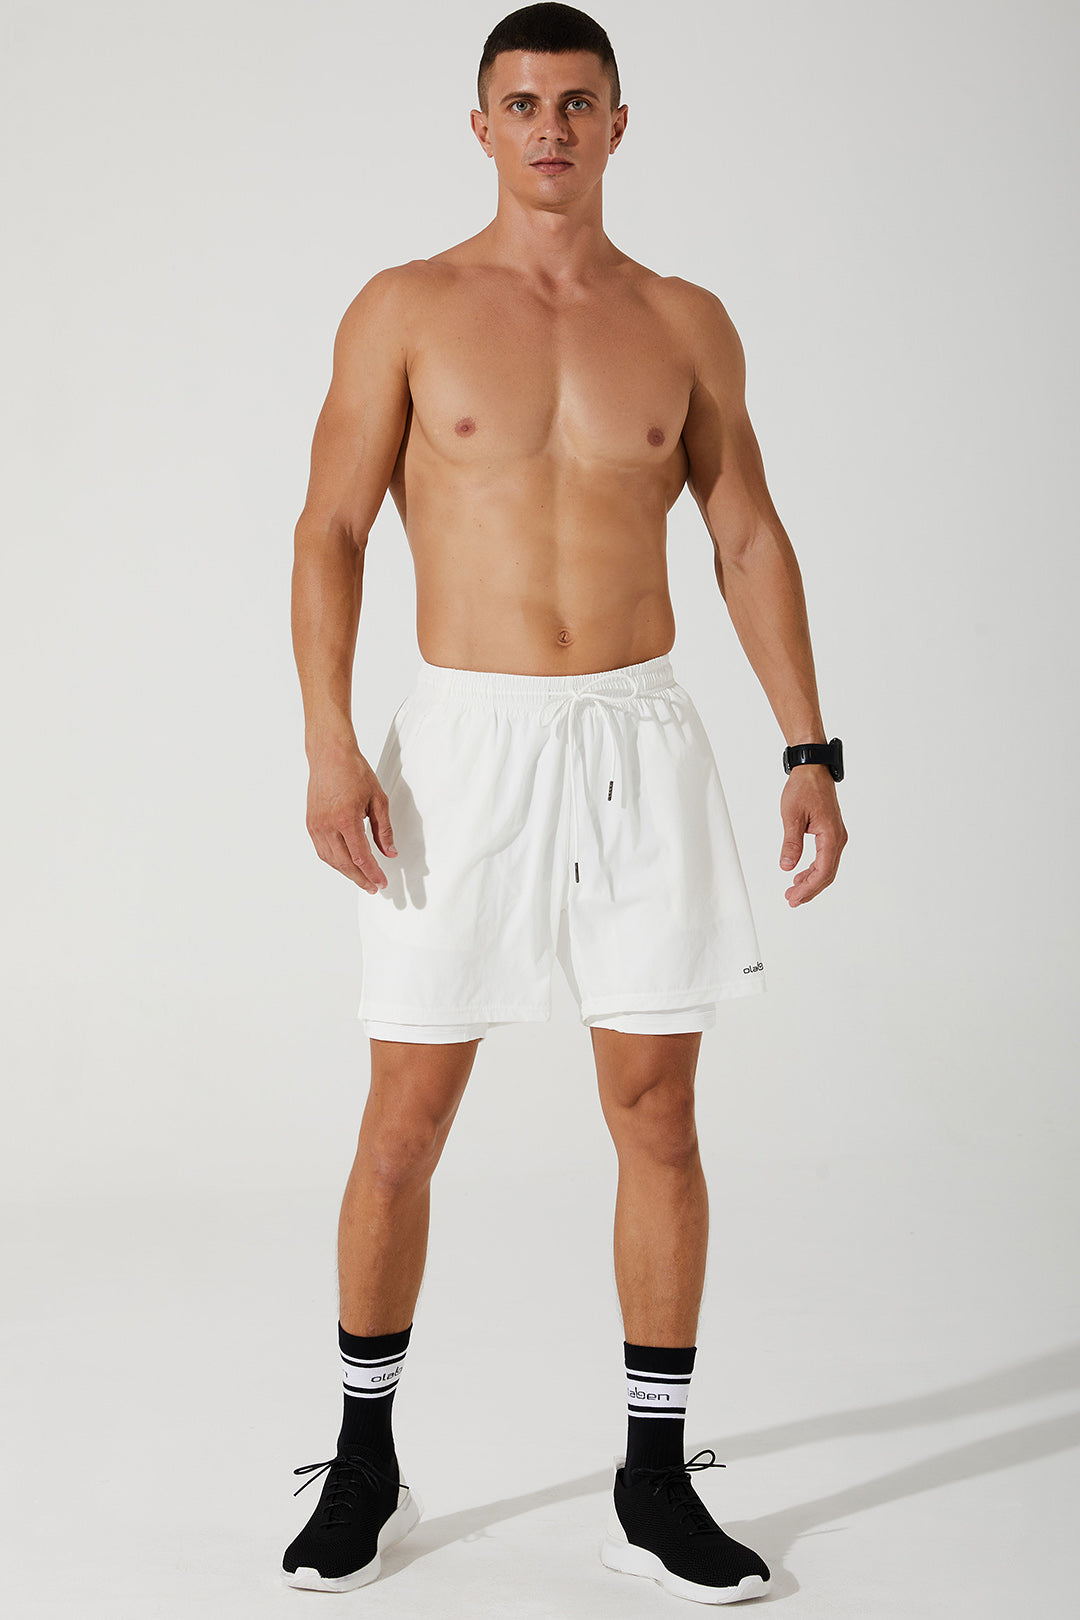 White men's shorts with repetition pattern, Vardan 9, OW-0014-MSH-WT, image 1.